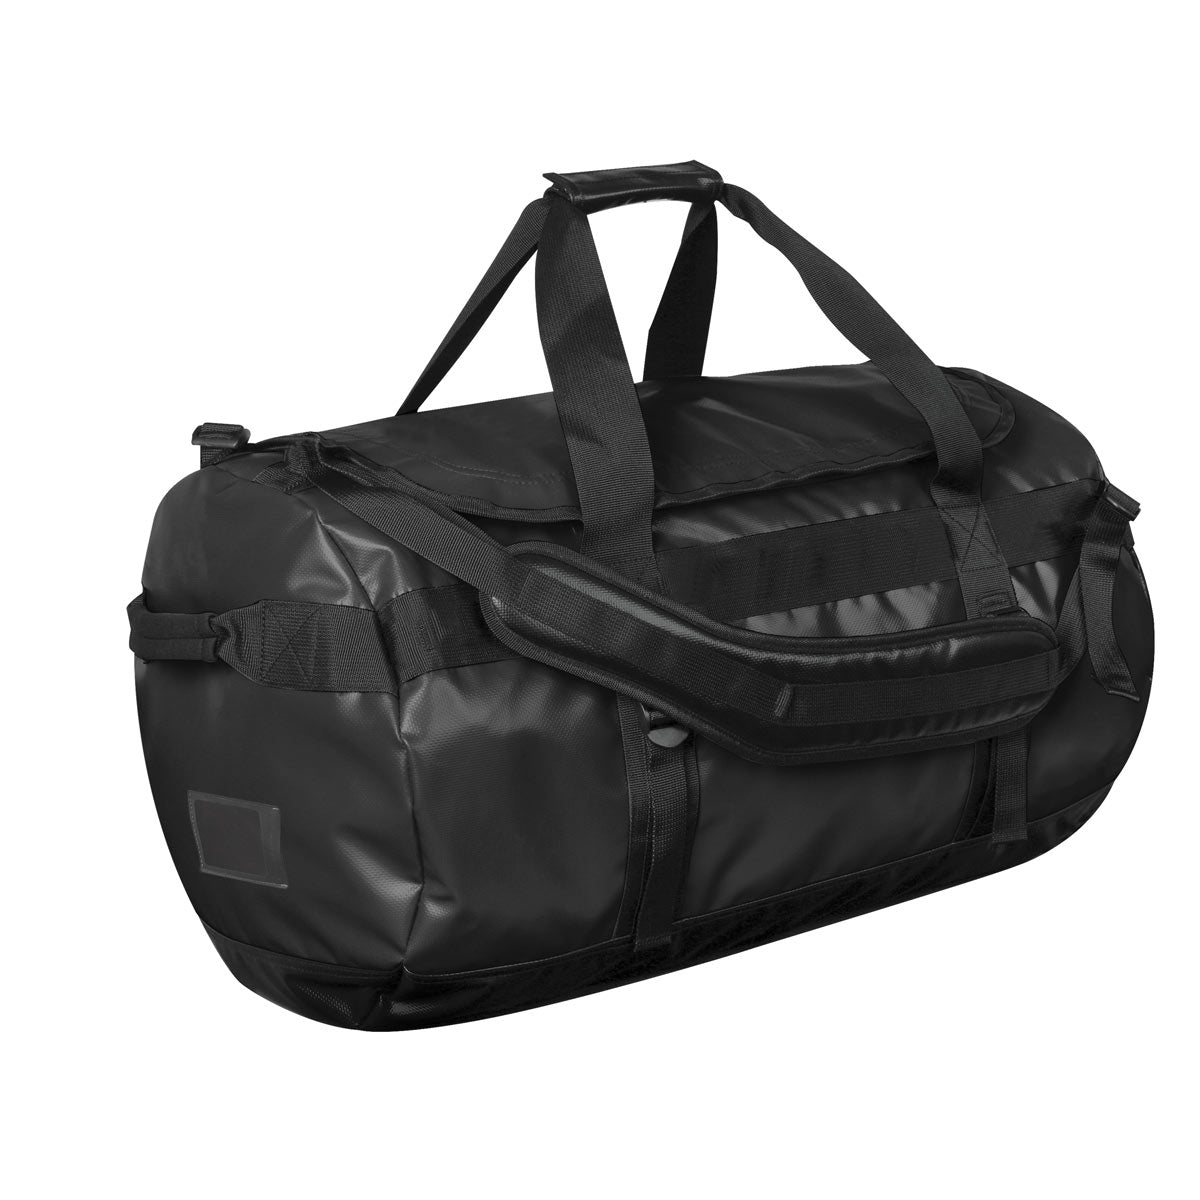 ASTRO Duffel Bag Travel Waterproof Bag With 2 Wheels For Easy